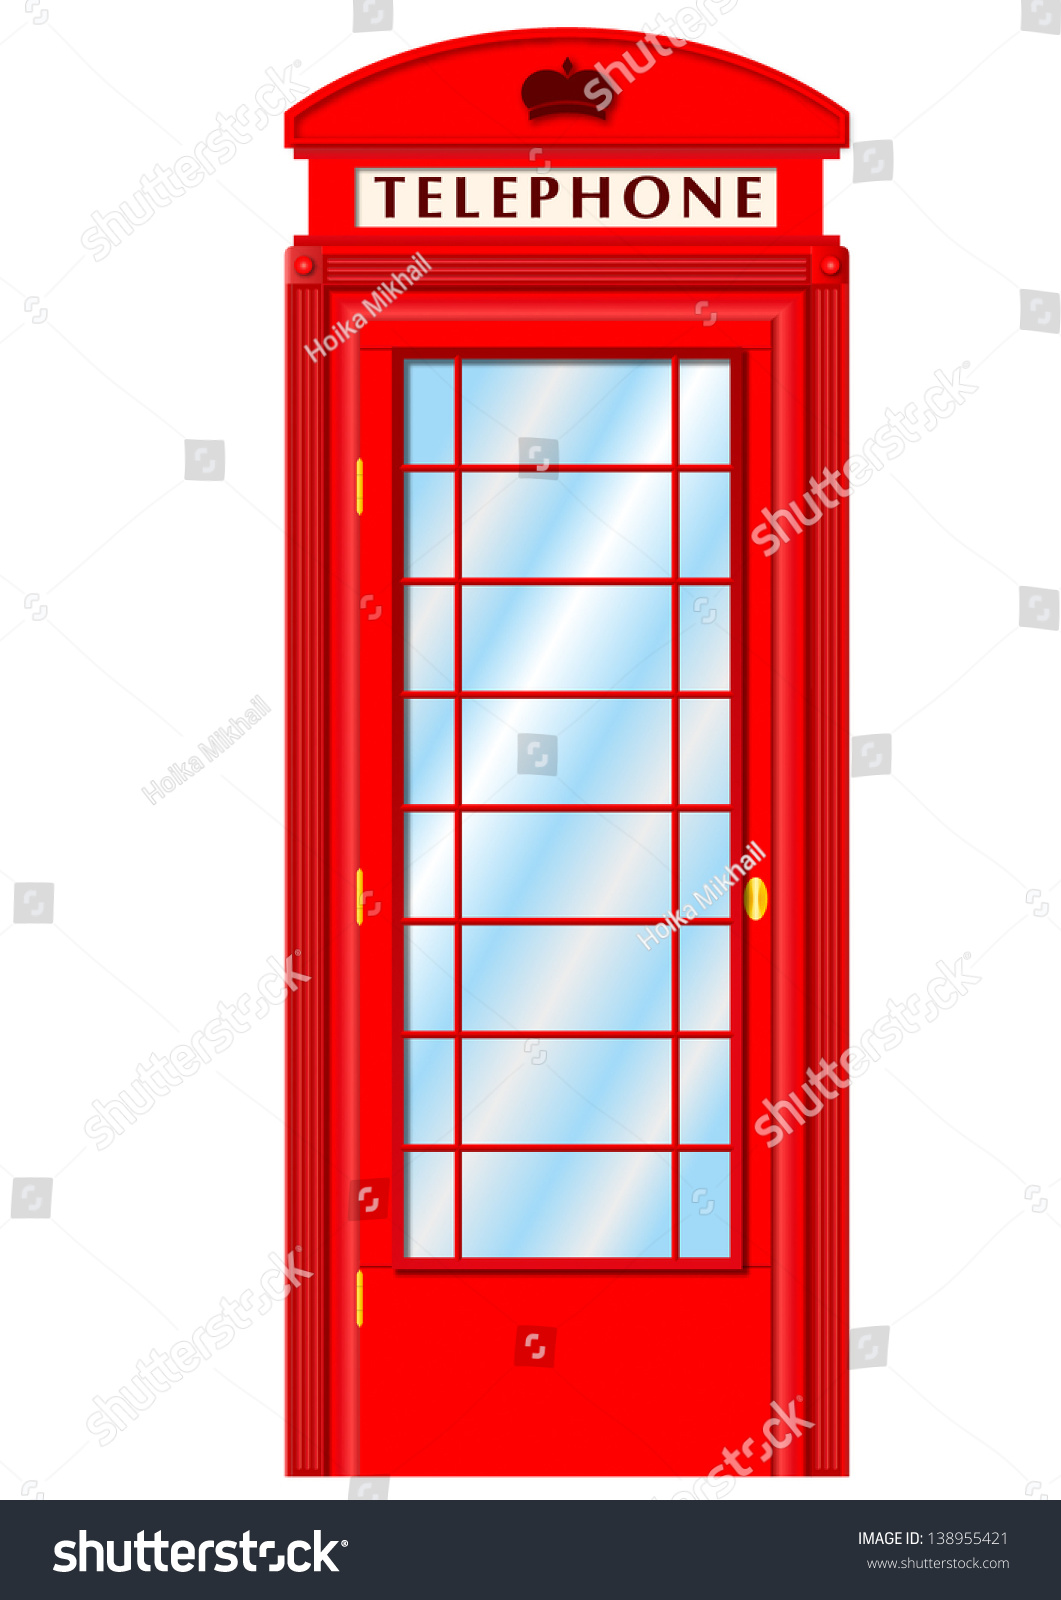 free clip art phone booth - photo #27